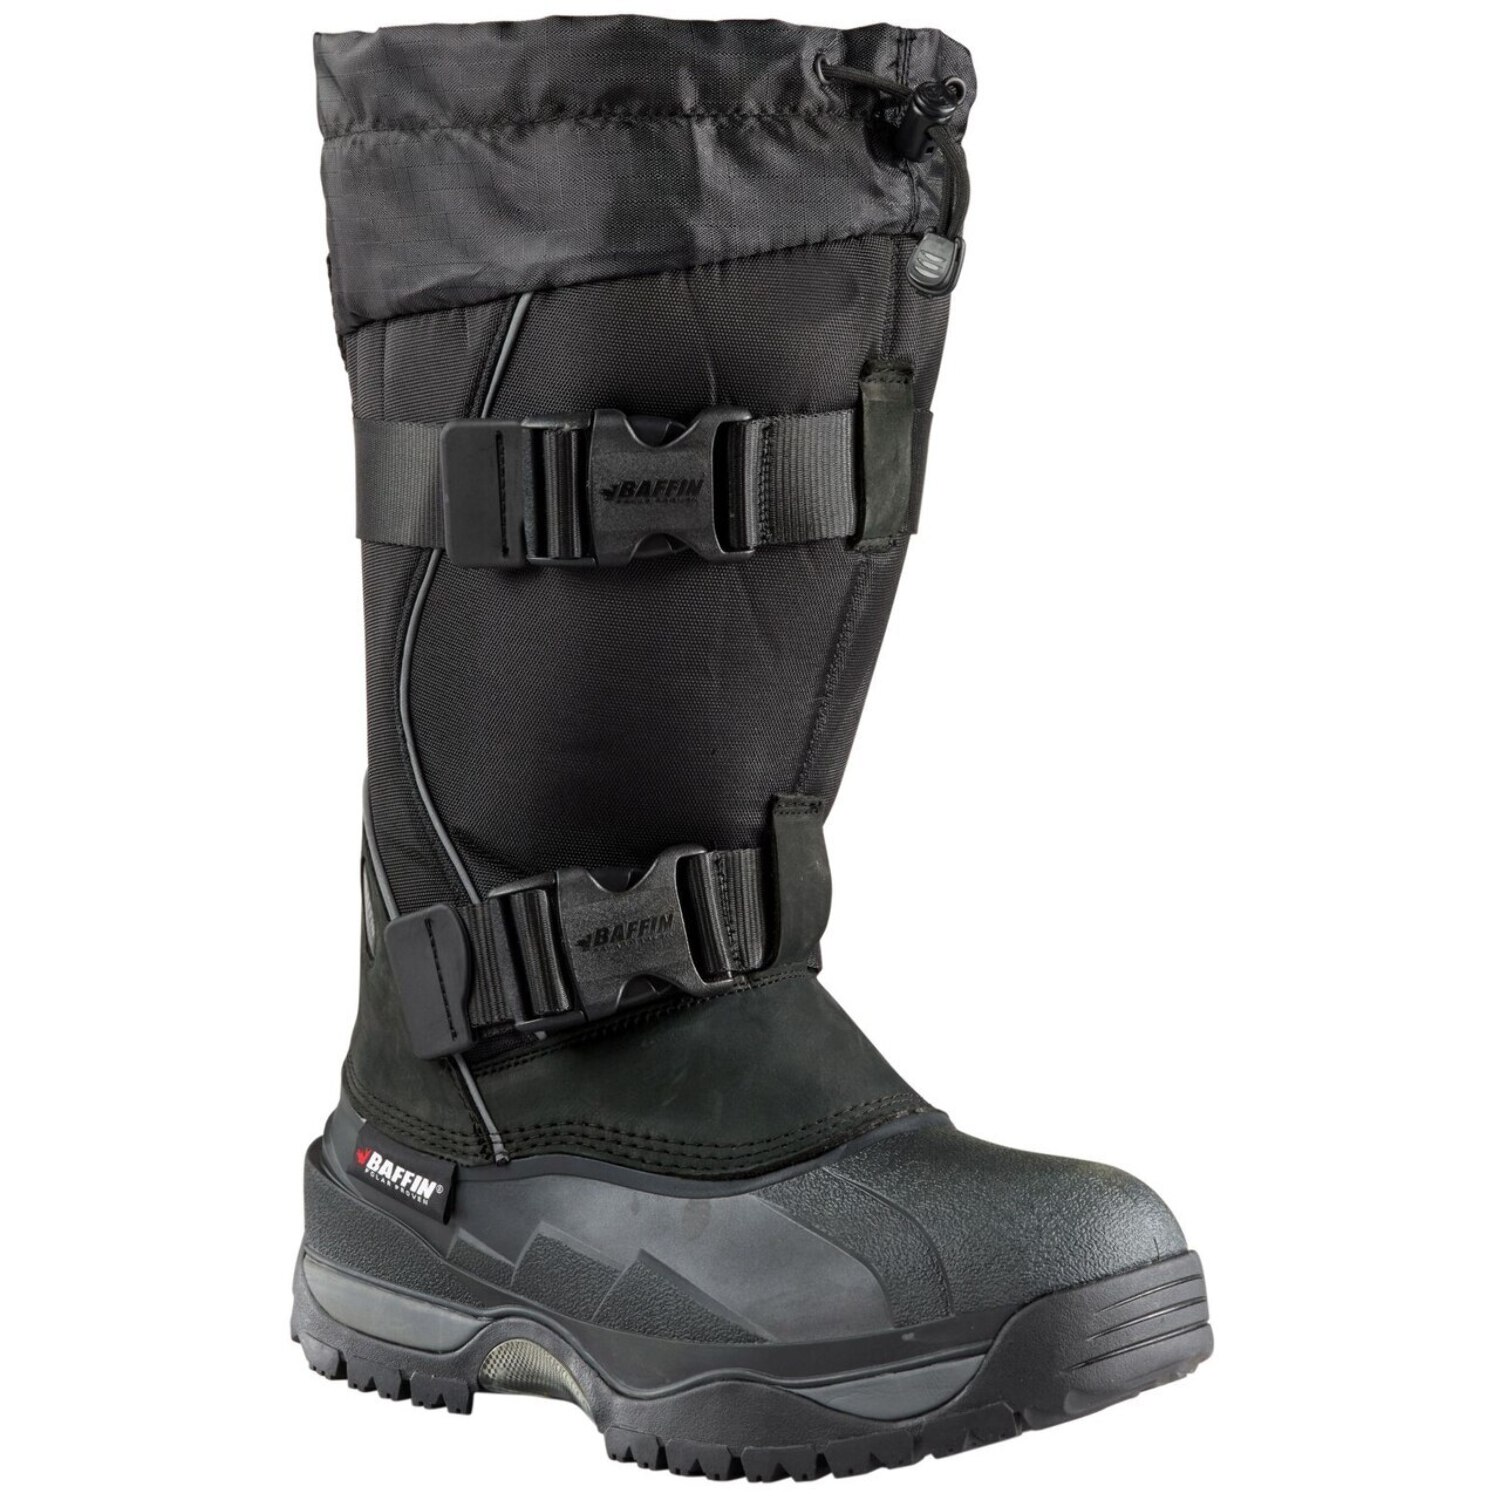 Baffin Impact Insulated Snow Boot - Men's - image 1 of 5